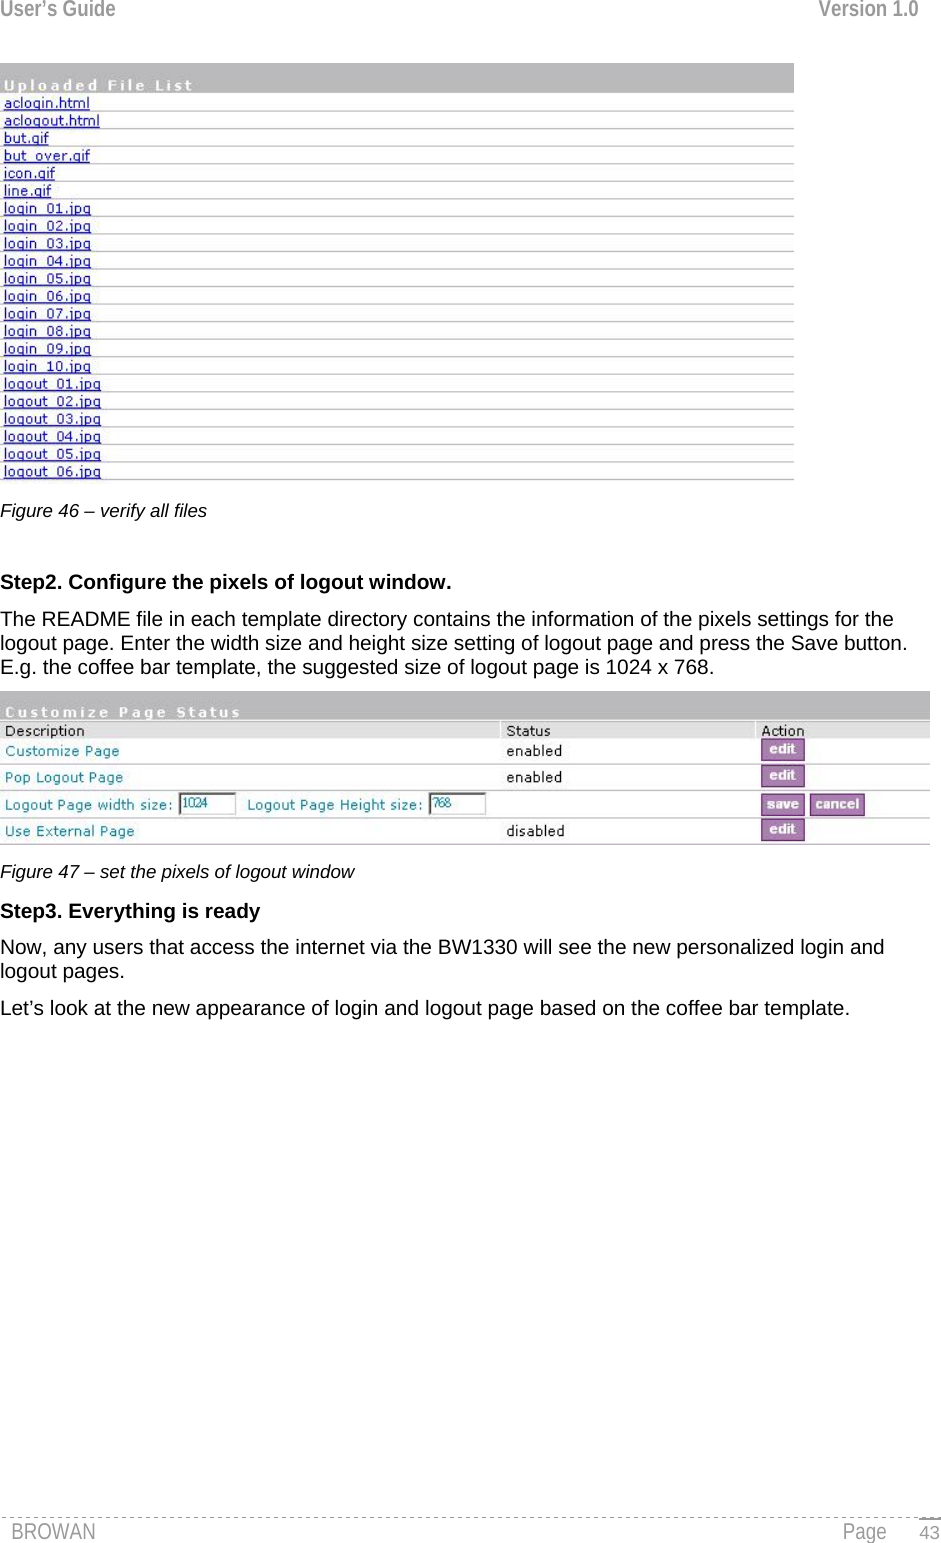 User’s Guide  Version 1.0   Figure 46 – verify all files   Step2. Configure the pixels of logout window. The README file in each template directory contains the information of the pixels settings for the logout page. Enter the width size and height size setting of logout page and press the Save button.  E.g. the coffee bar template, the suggested size of logout page is 1024 x 768.  Figure 47 – set the pixels of logout window Step3. Everything is ready  Now, any users that access the internet via the BW1330 will see the new personalized login and logout pages. Let’s look at the new appearance of login and logout page based on the coffee bar template. BROWAN                                                                                                                                               Page   43